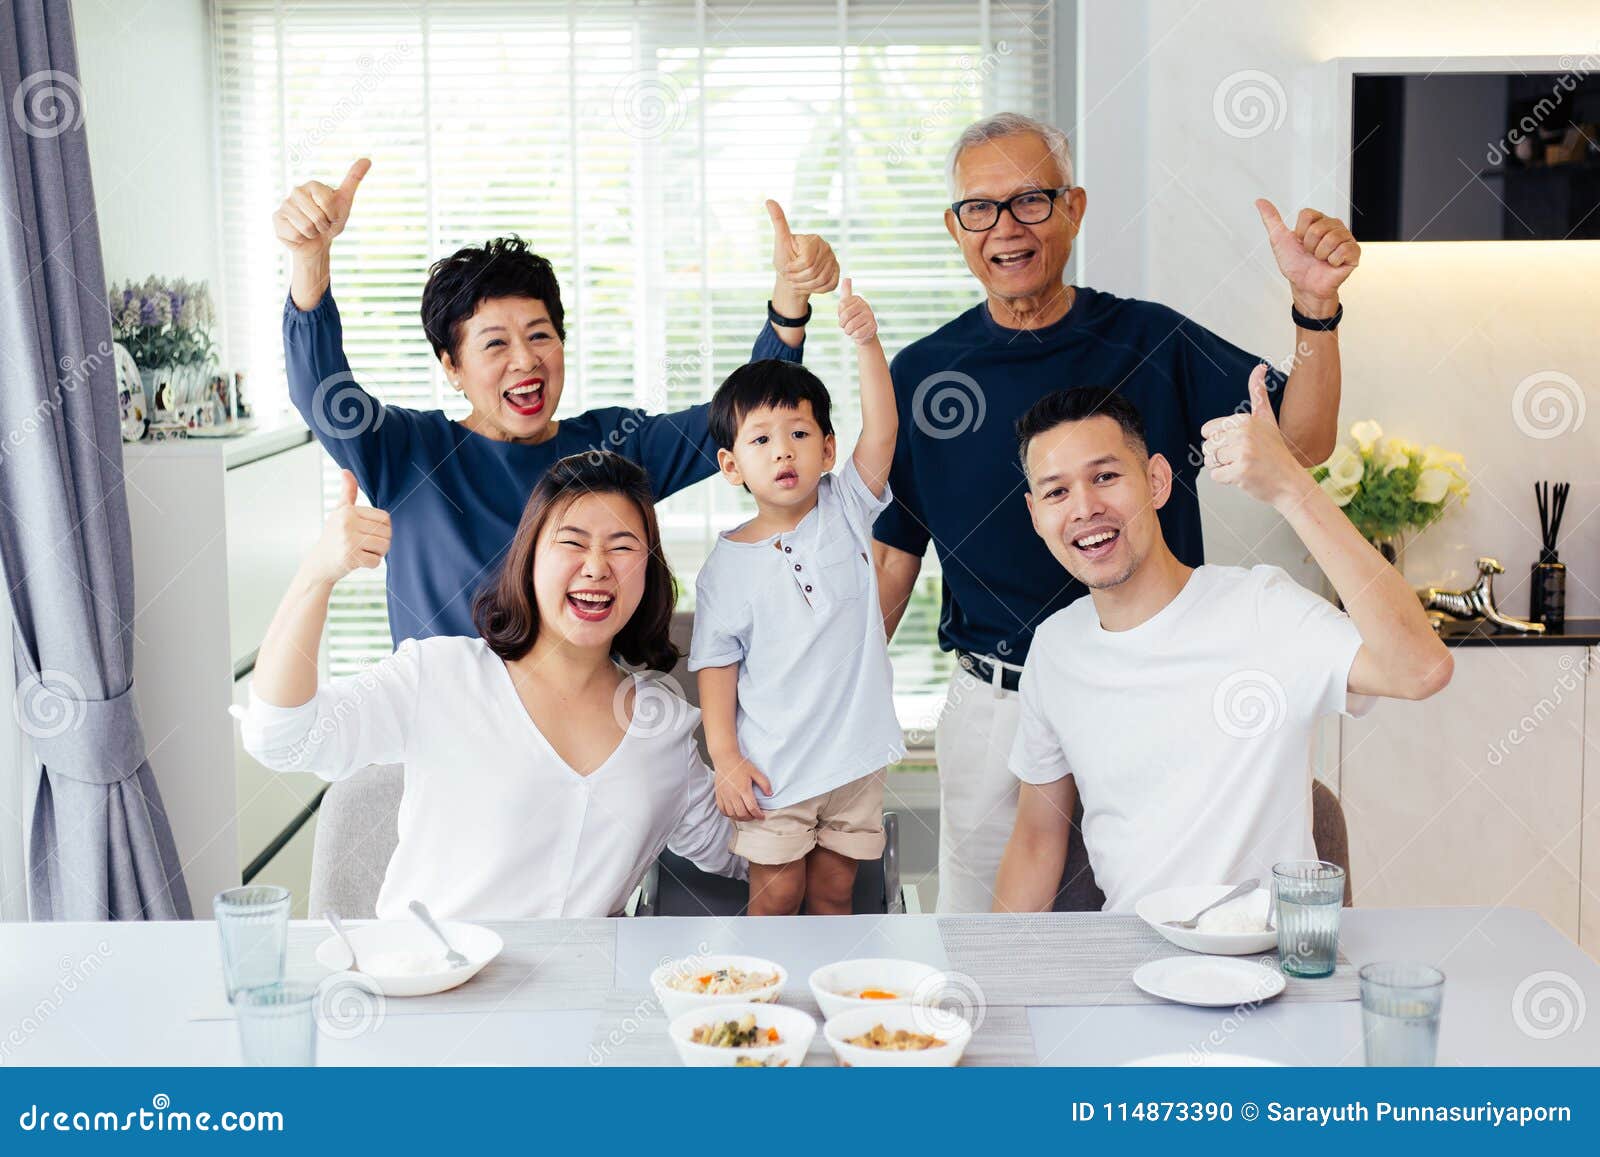 extended asian family of three generations having a meal together and showing thumbs up at home with happiness